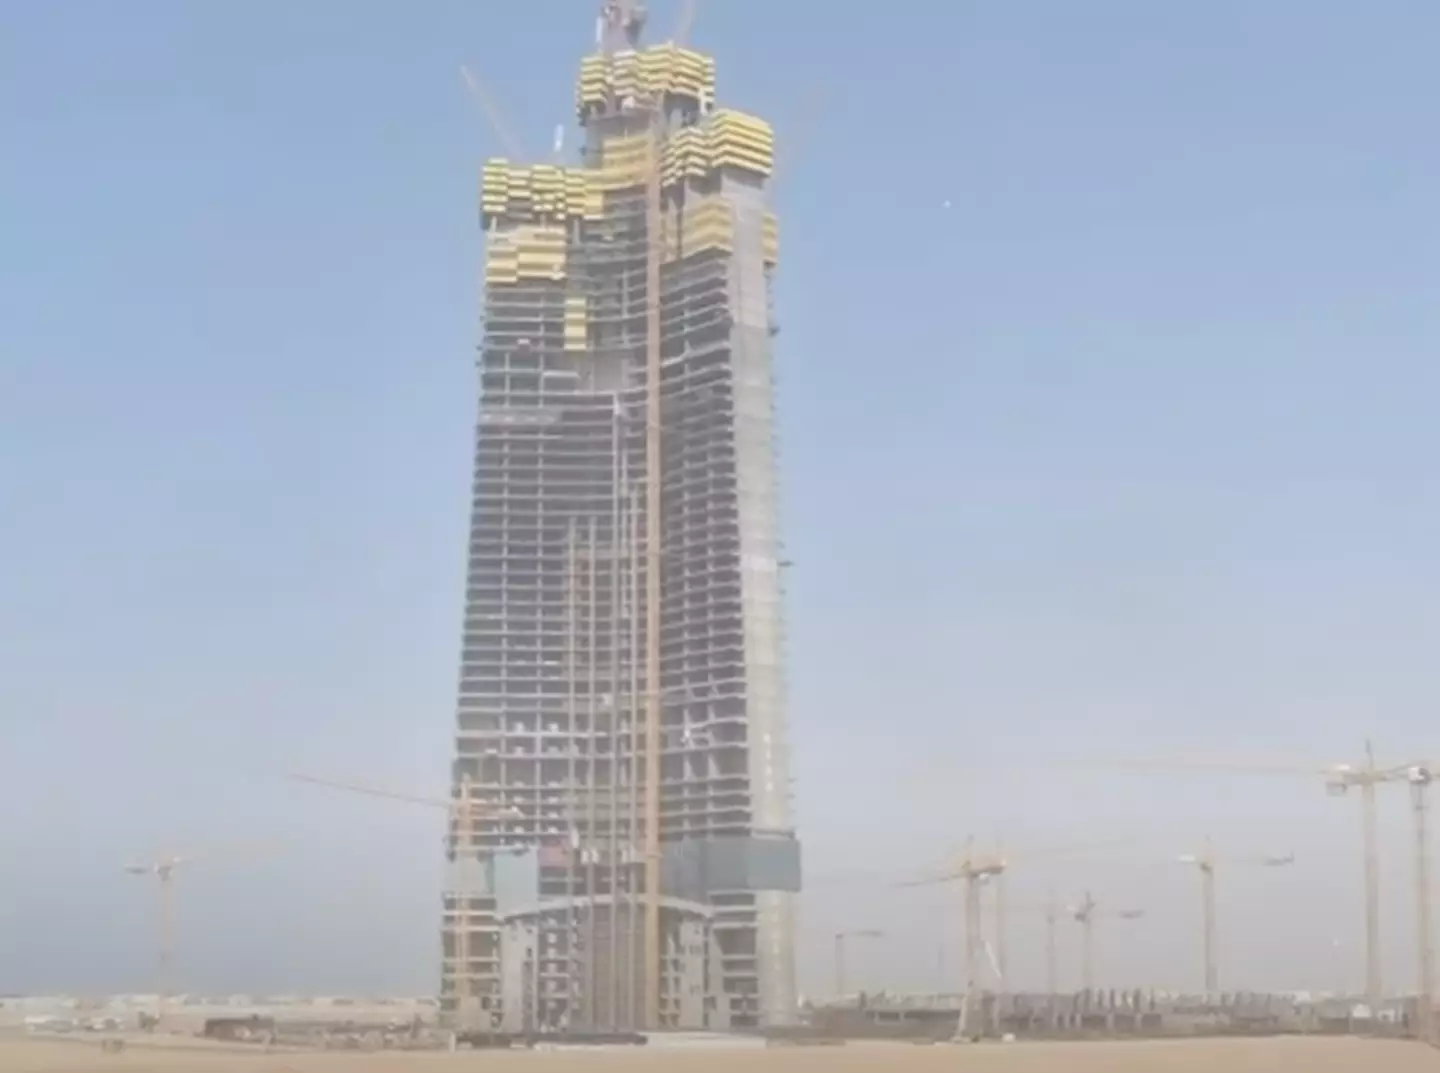 The incomplete Jeddah Tower structure in Jeddah, Saudi Arabia.